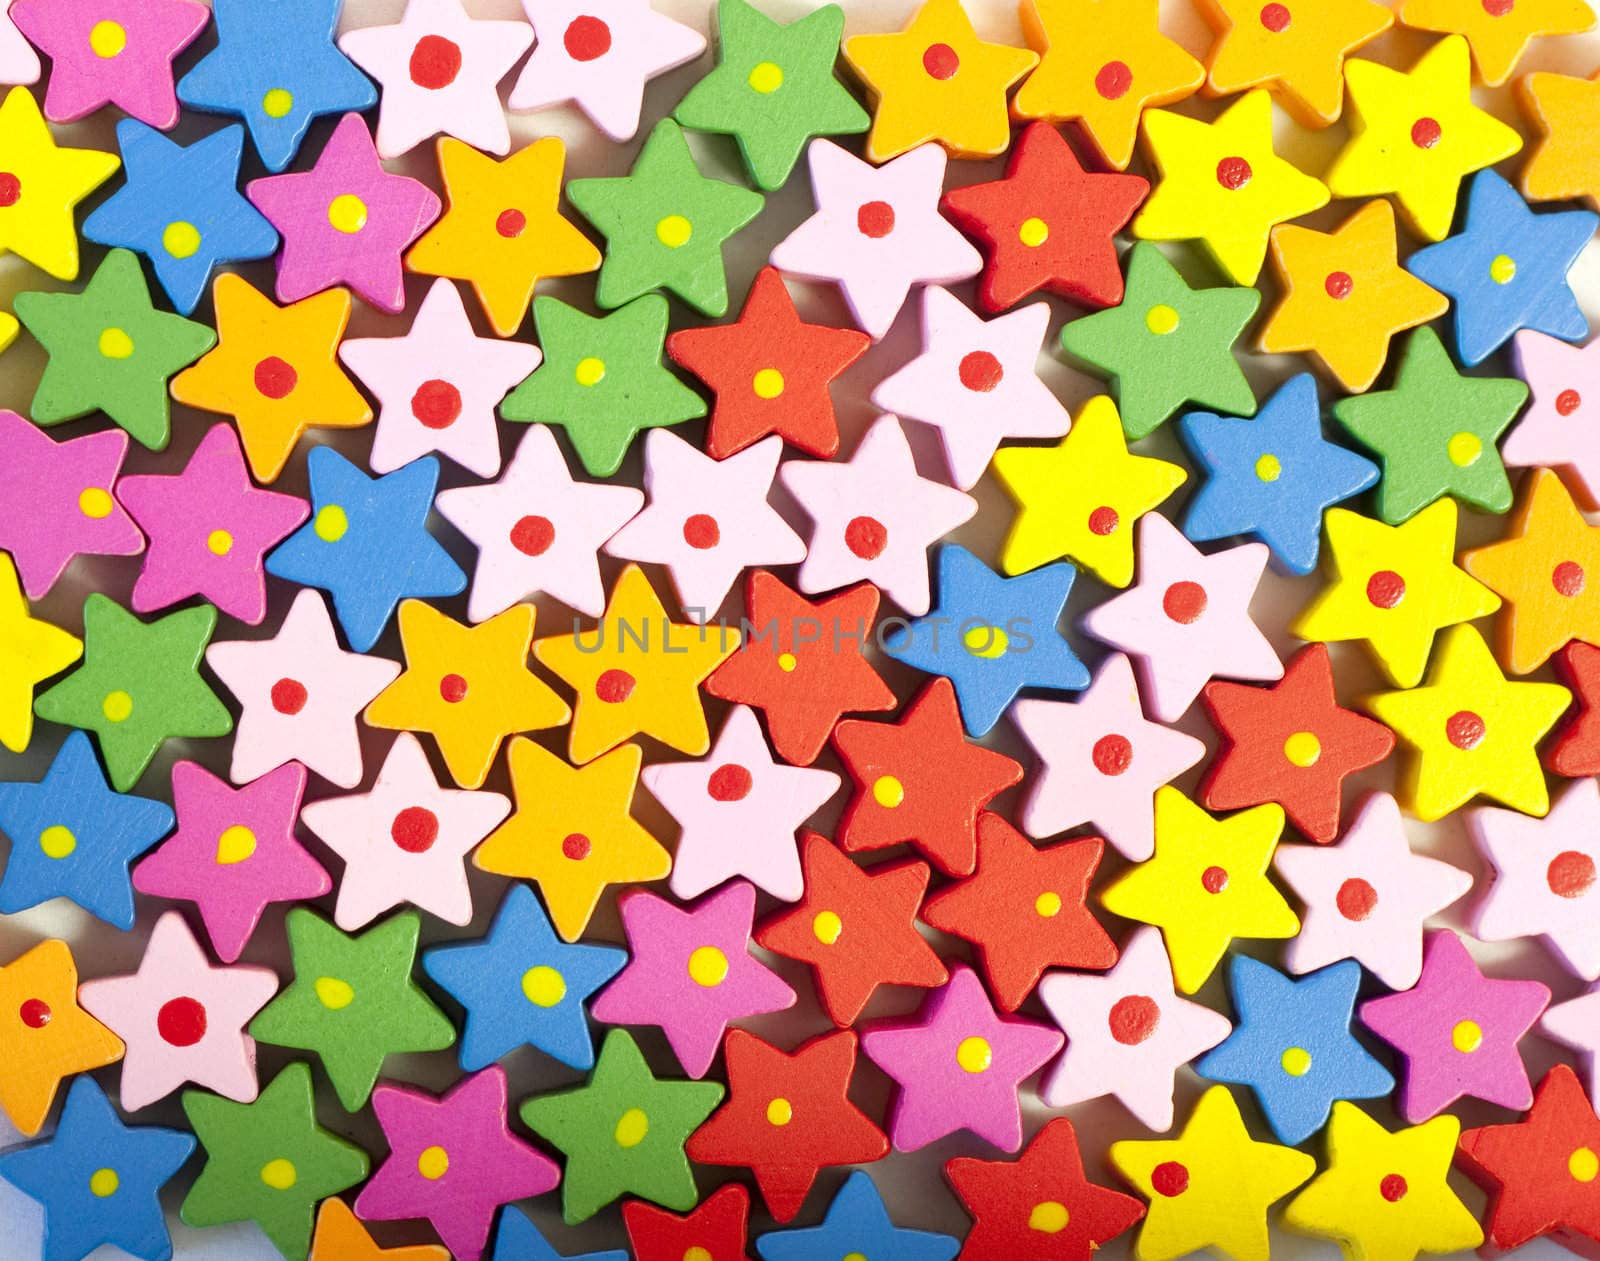 Background of many colorful painted wooden bead stars